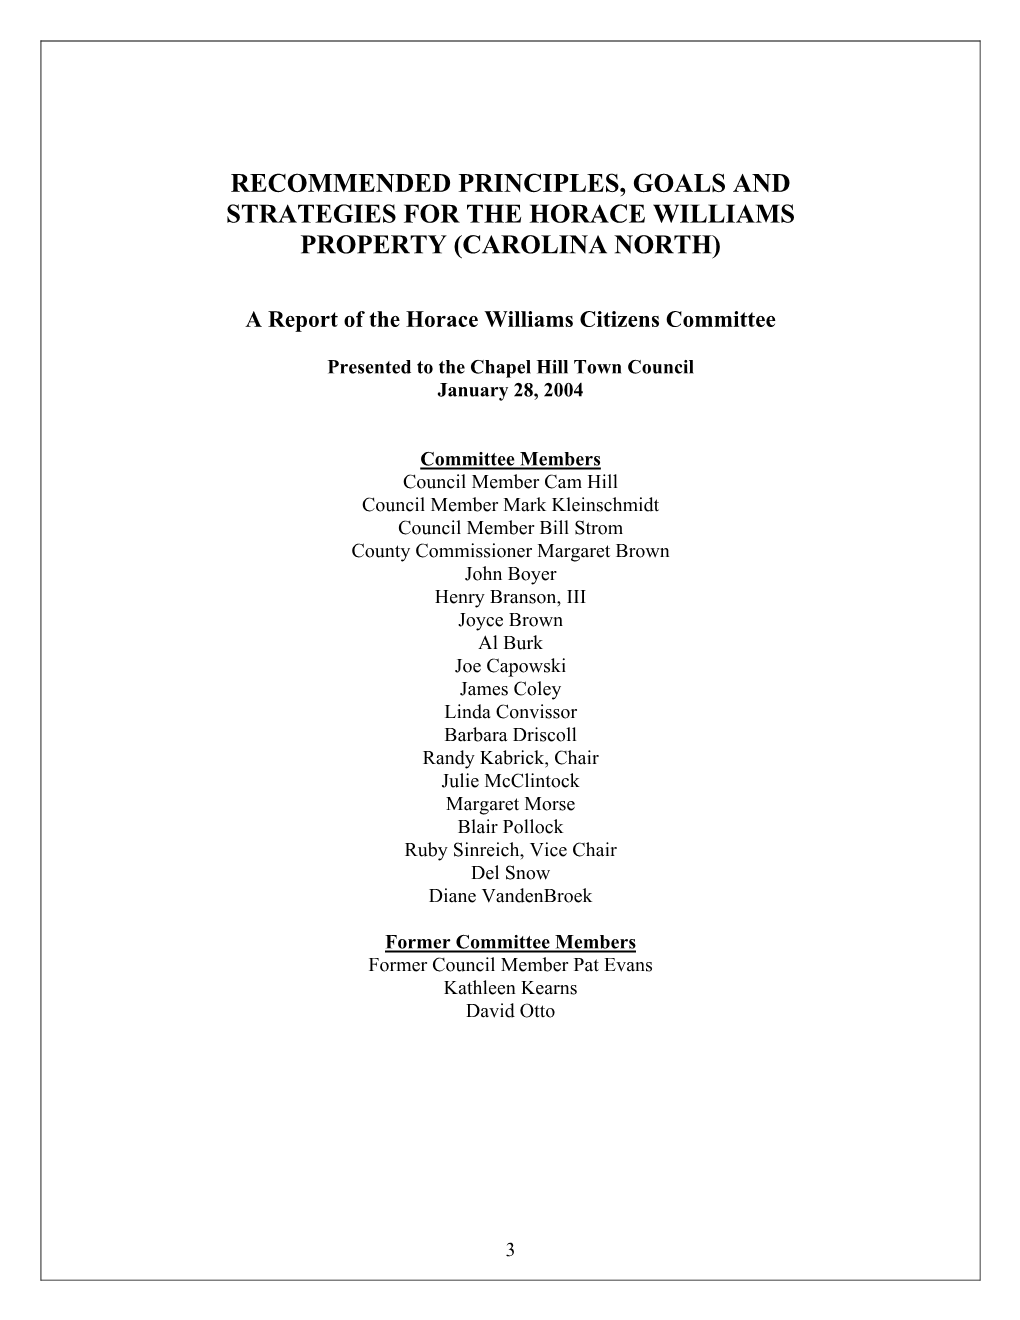 Recommended Principles, Goals and Strategies for the Horace Williams Property (Carolina North)